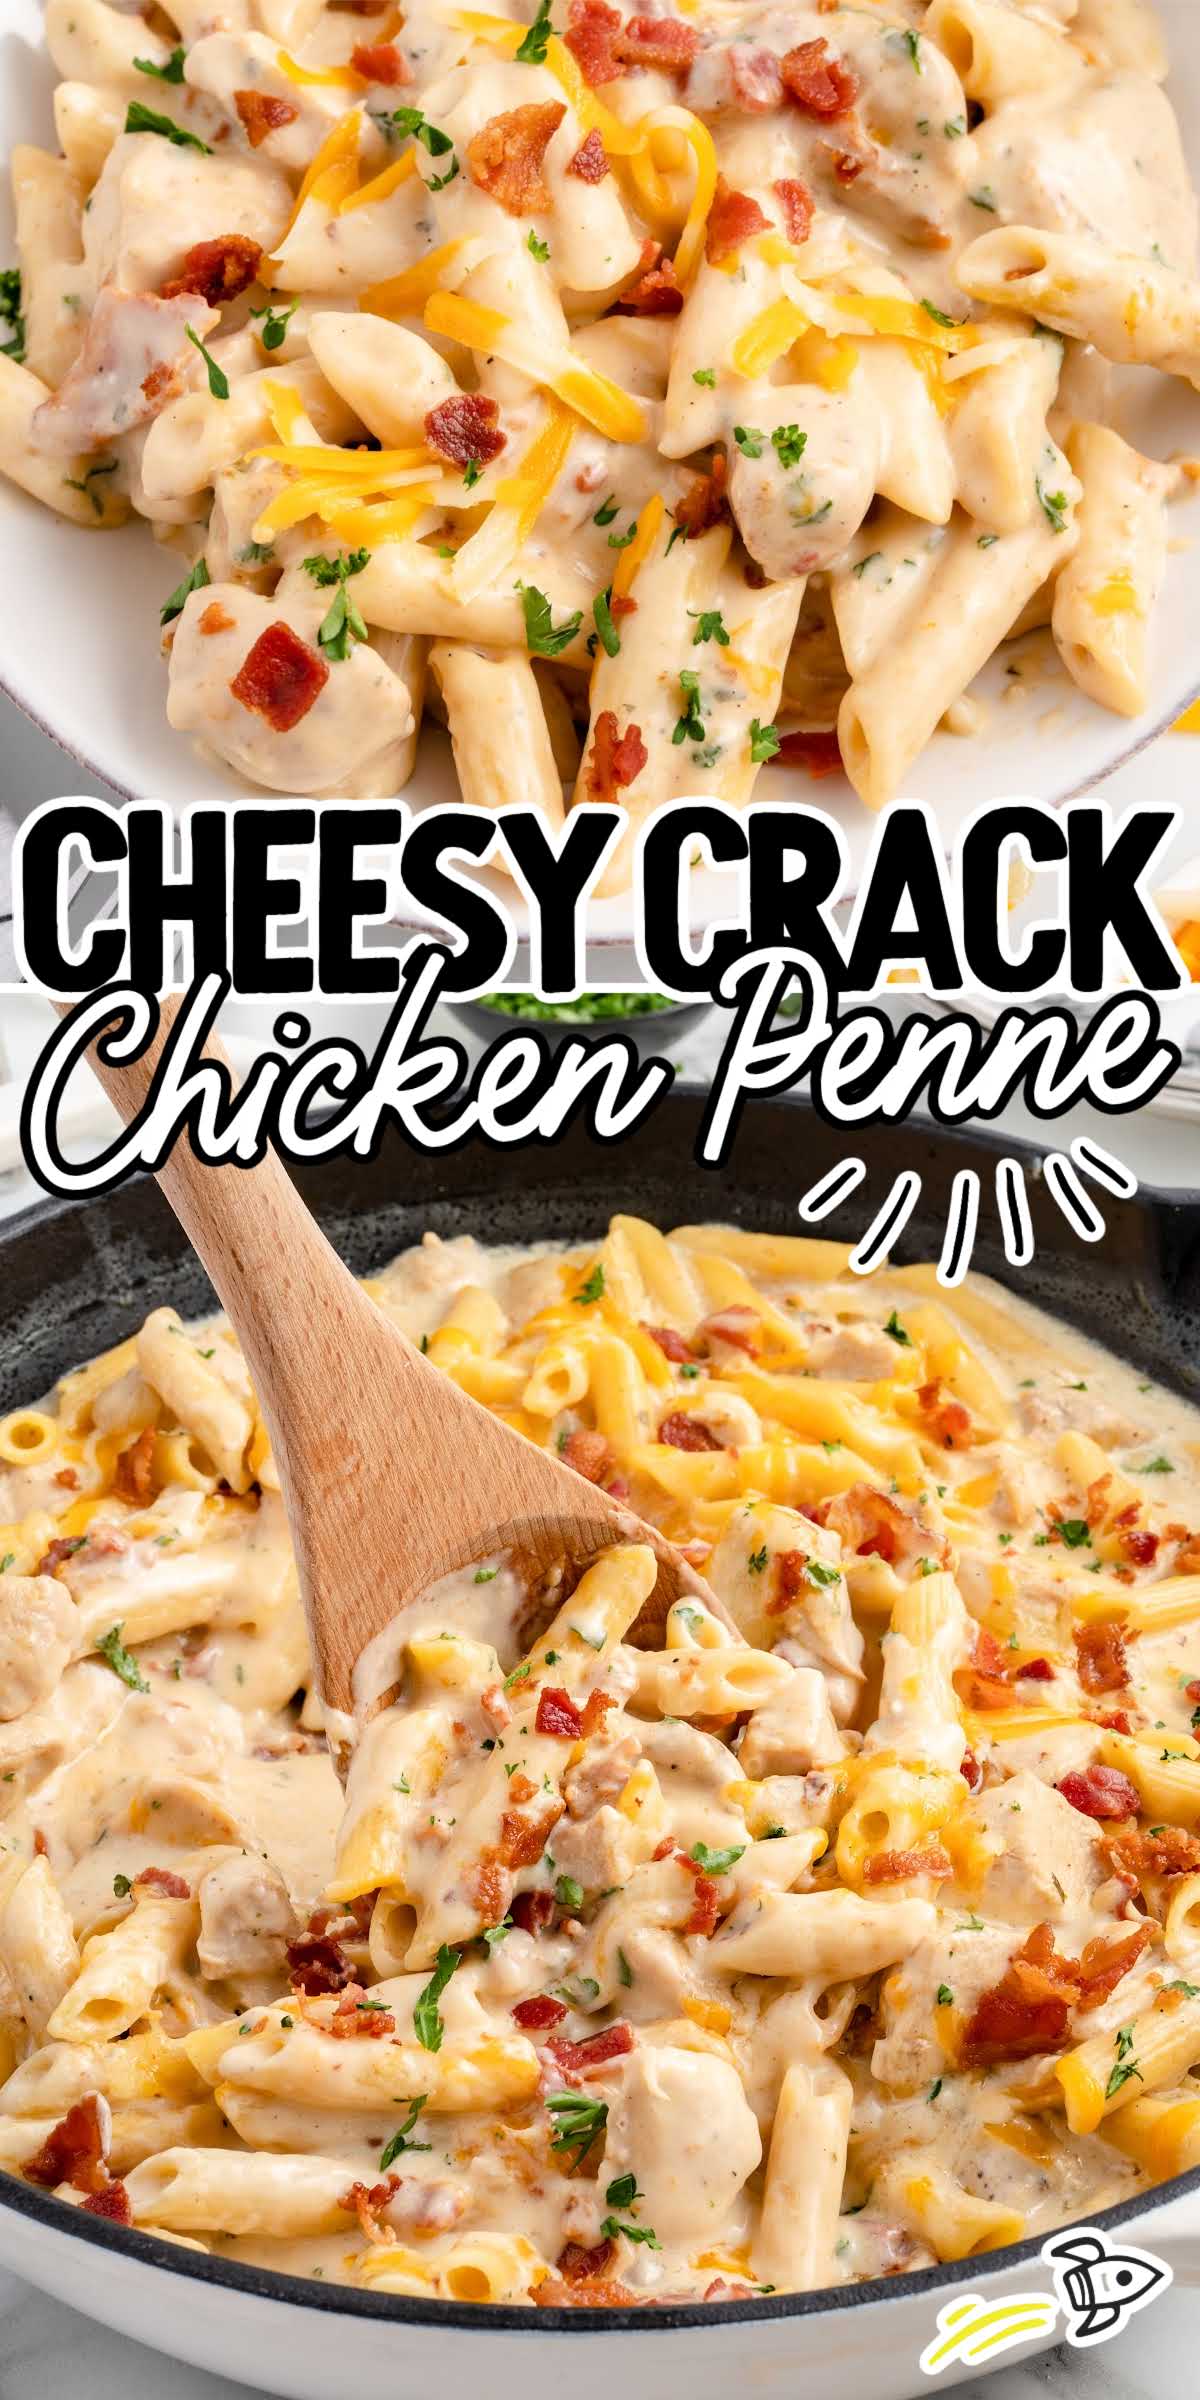 Crack Chicken Penne - Spaceships and Laser Beams